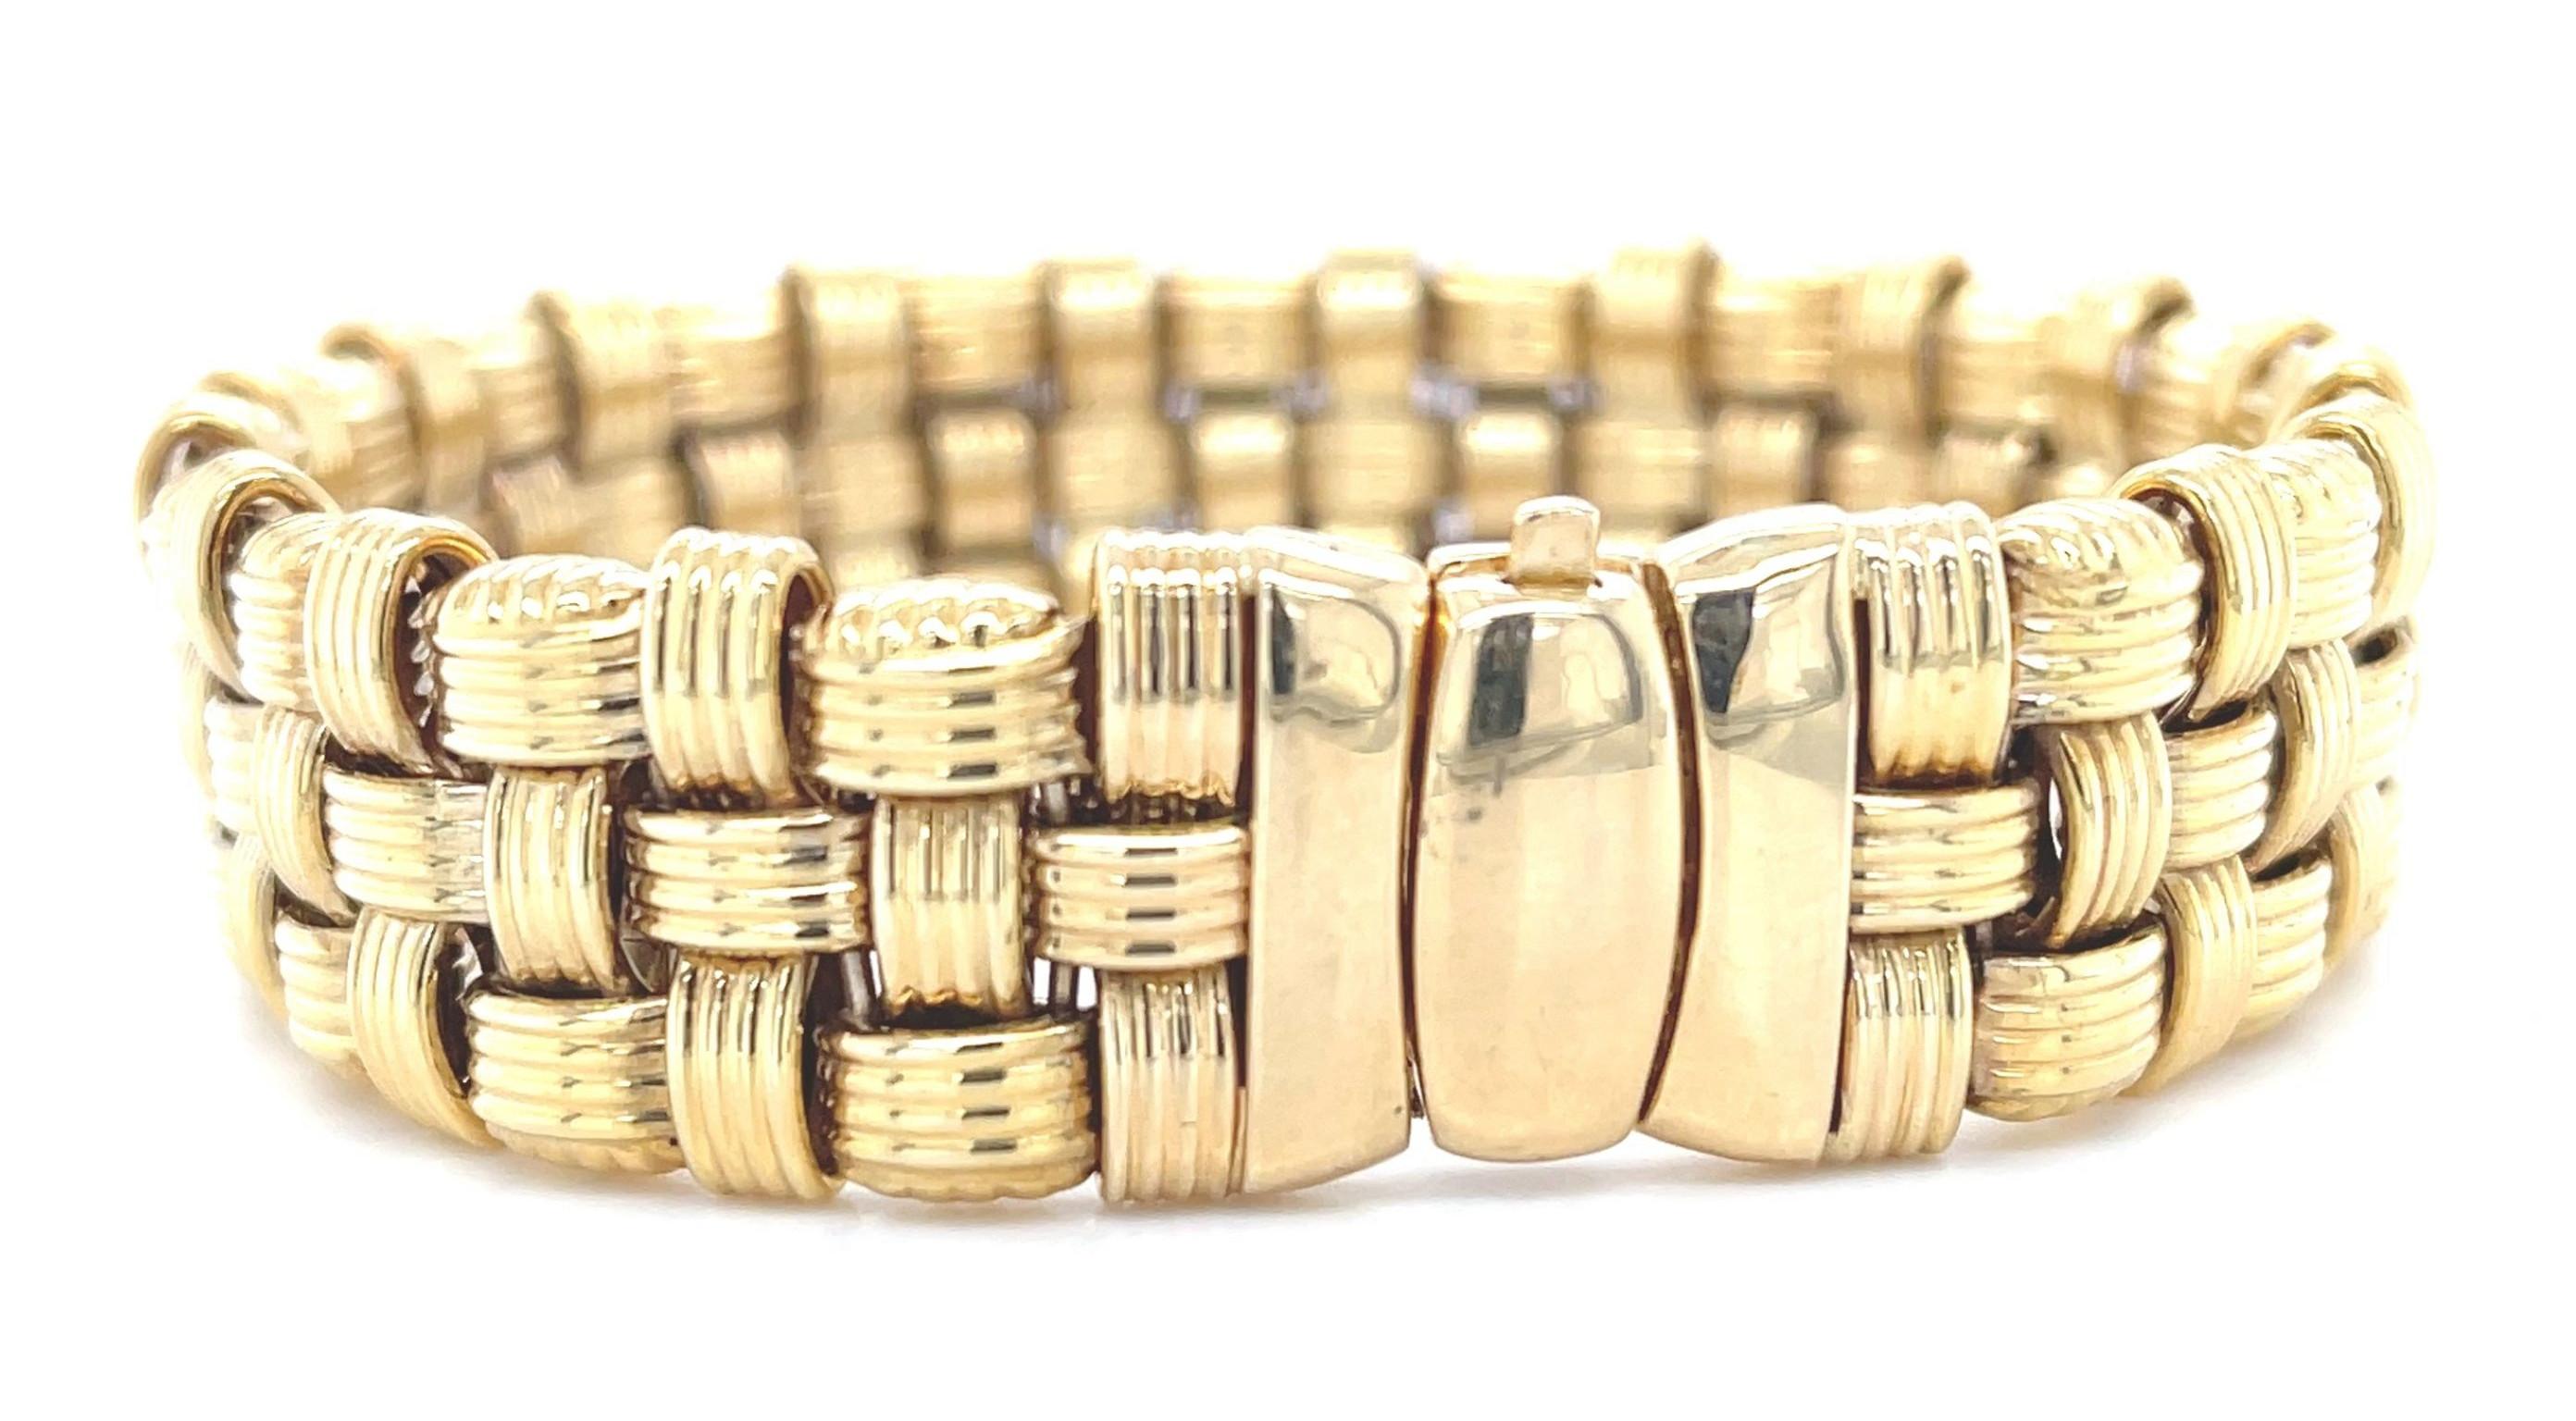  Italian Basketweave Bracelet in 14k Yellow Gold In New Condition For Sale In Los Angeles, CA